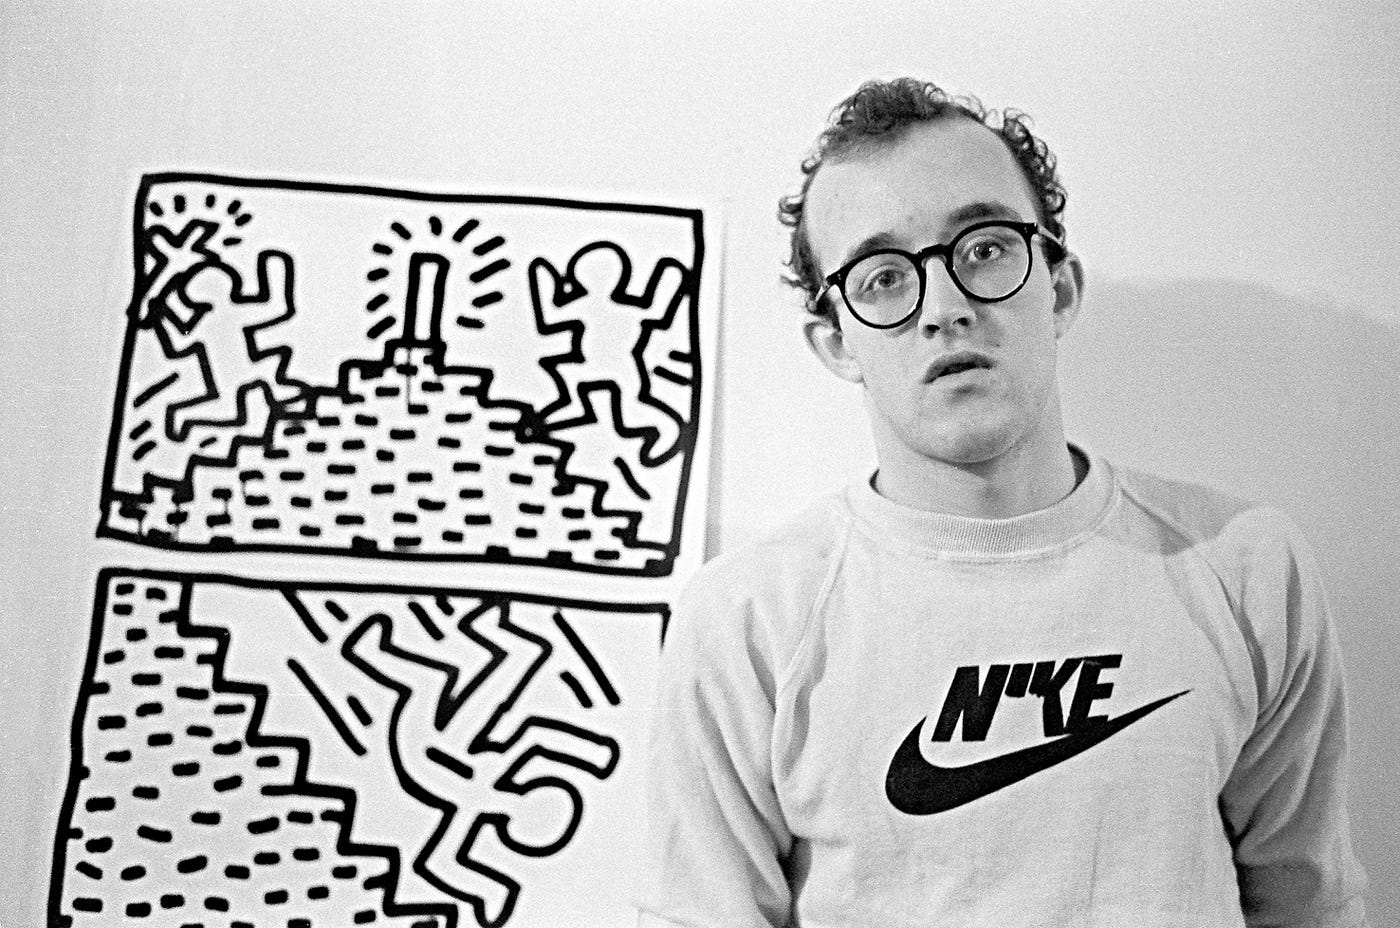 Keith Haring's Art Has a Secret Language—Here's How to Decode His